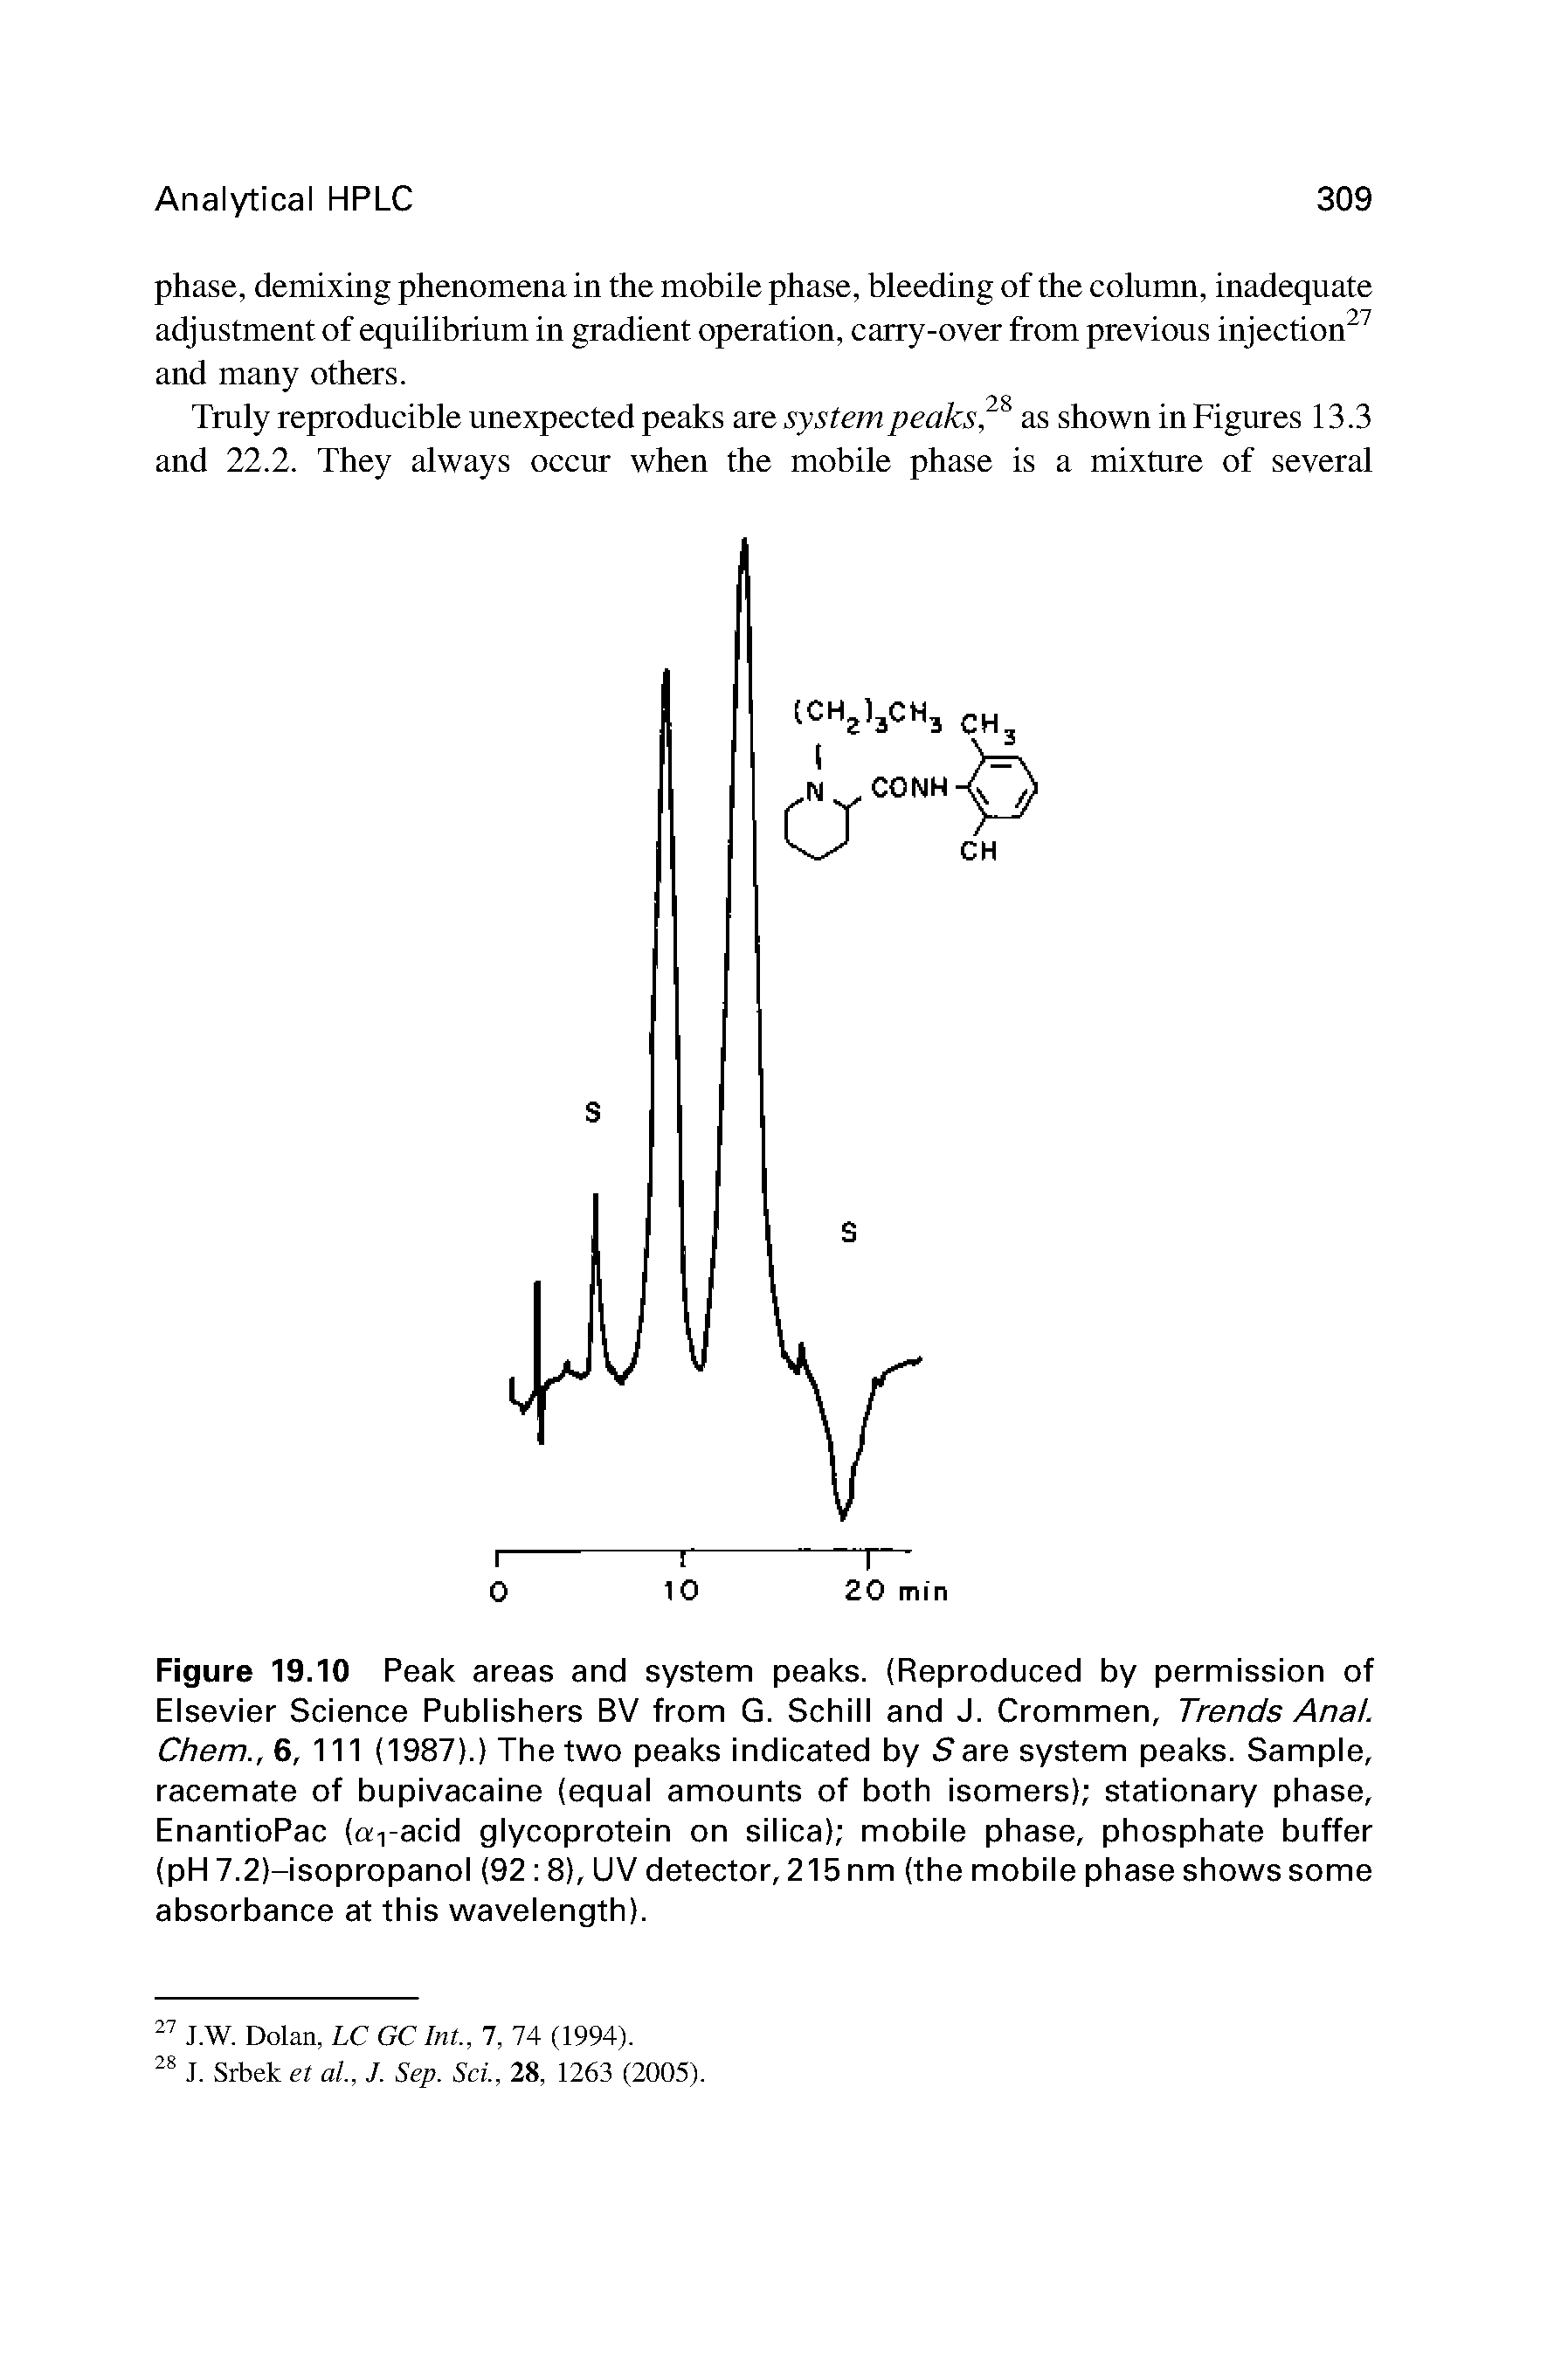 Figure 19.10 Peak areas and system peaks. (Reproduced by permission of Elsevier Science Publishers BV from G. Sehili and J. Crommen, Trends Anal. Chem., 6, 111 (1987).) The two peaks indicated by Sare system peaks. Sample, racemate of bupivacaine (equal amounts of both isomers) stationary phase, EnantioPac (aq-acid glycoprotein on silica) mobile phase, phosphate buffer (pH 7.2)-isopropanol (92 8), UV detector, 215 nm (the mobile phase shows some absorbance at this wavelength).